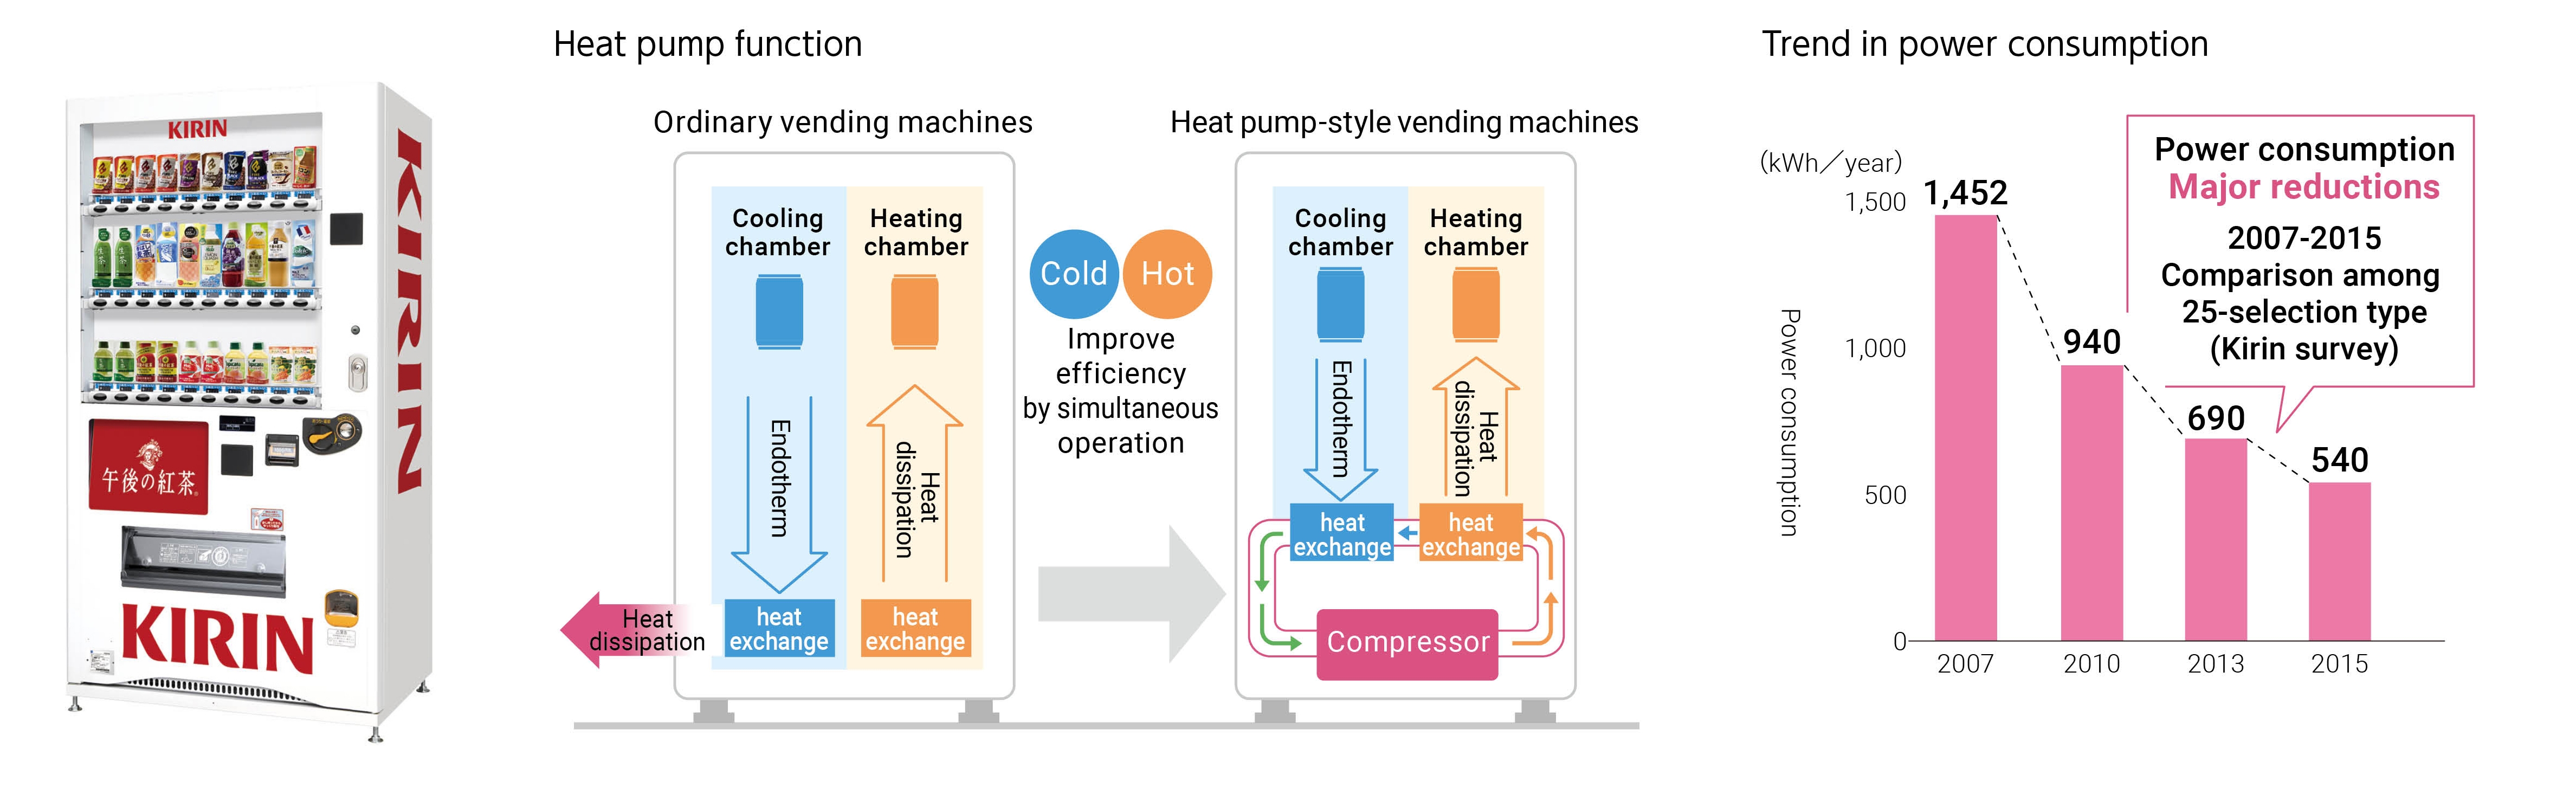 About heat pump Trend in power consumption